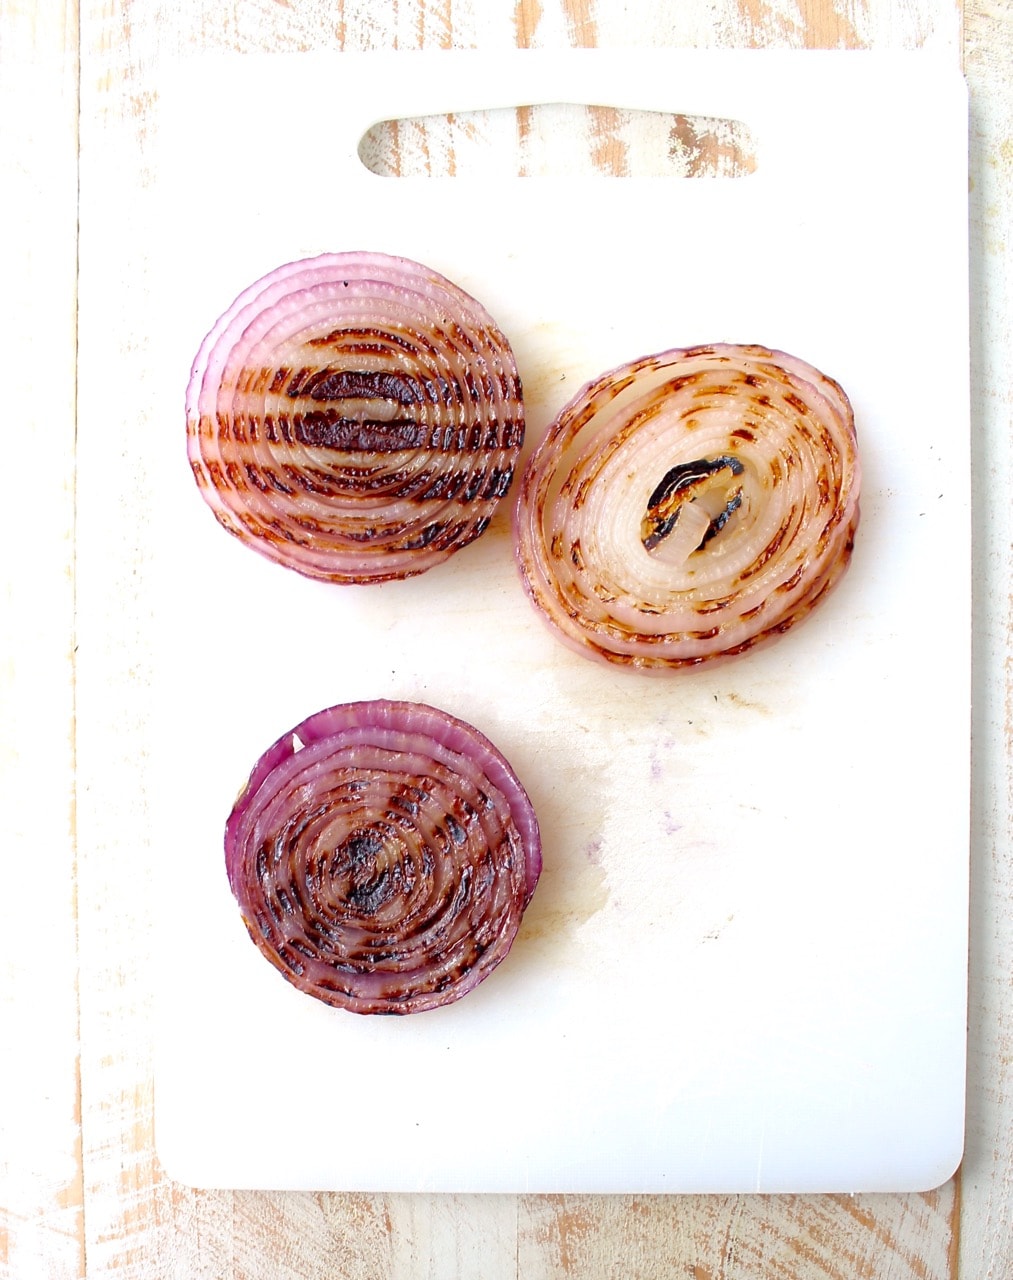 grilled slices of onions on cutting board